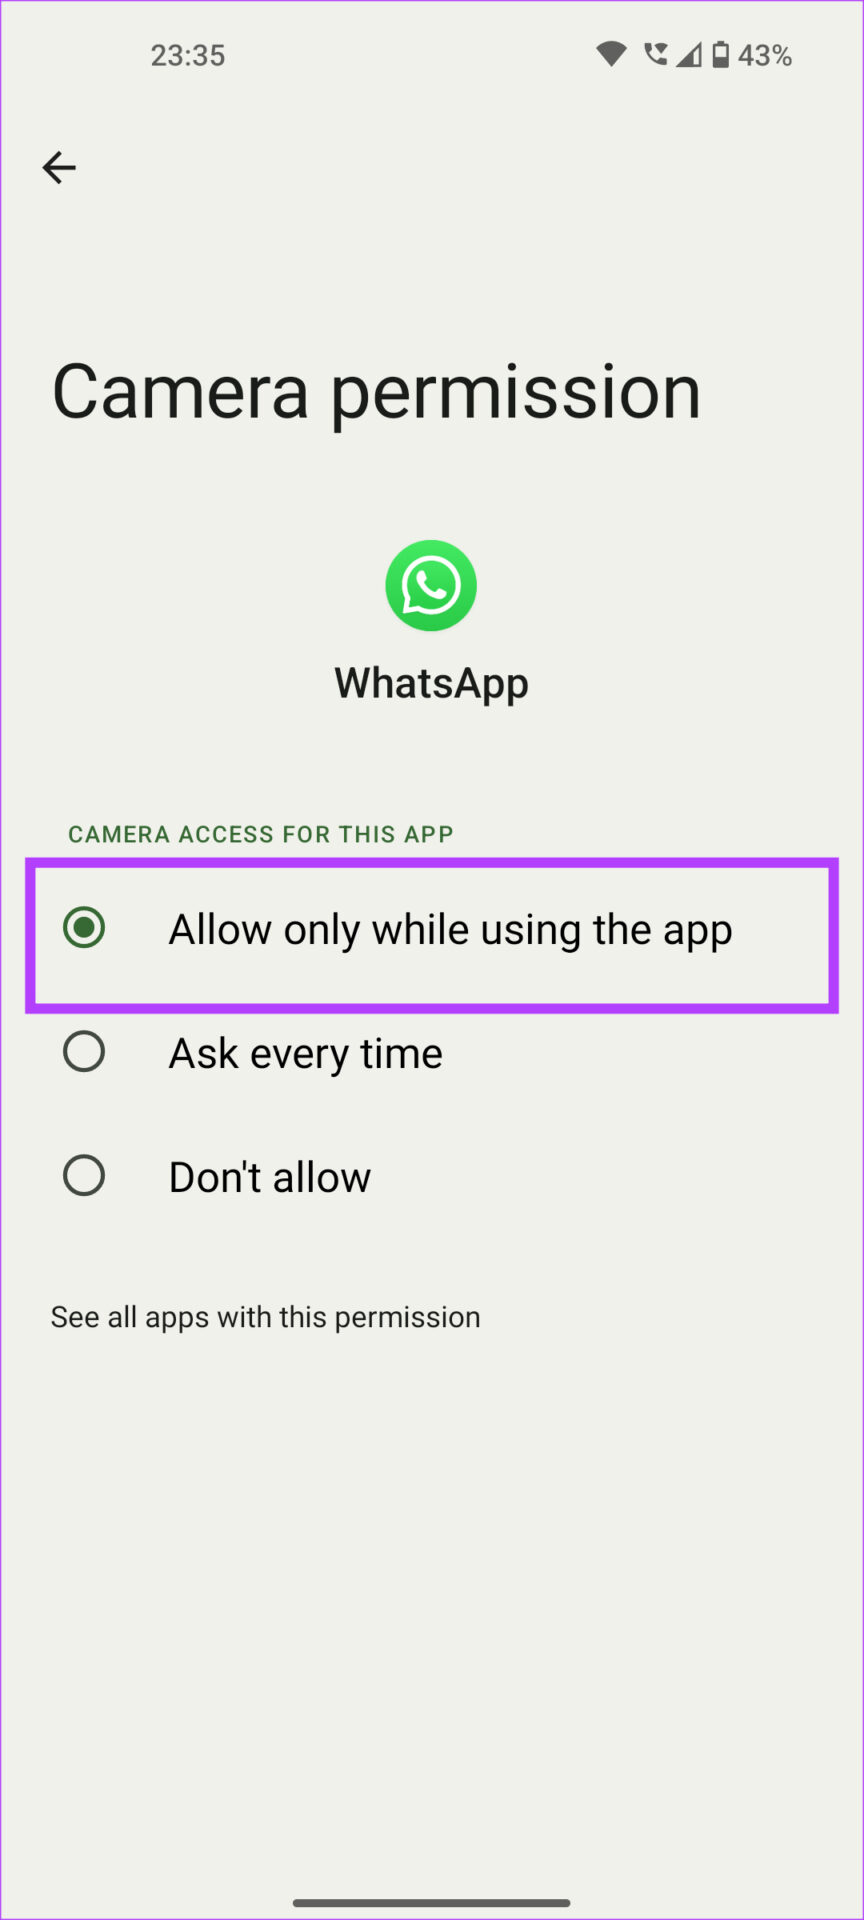 allow while using the app